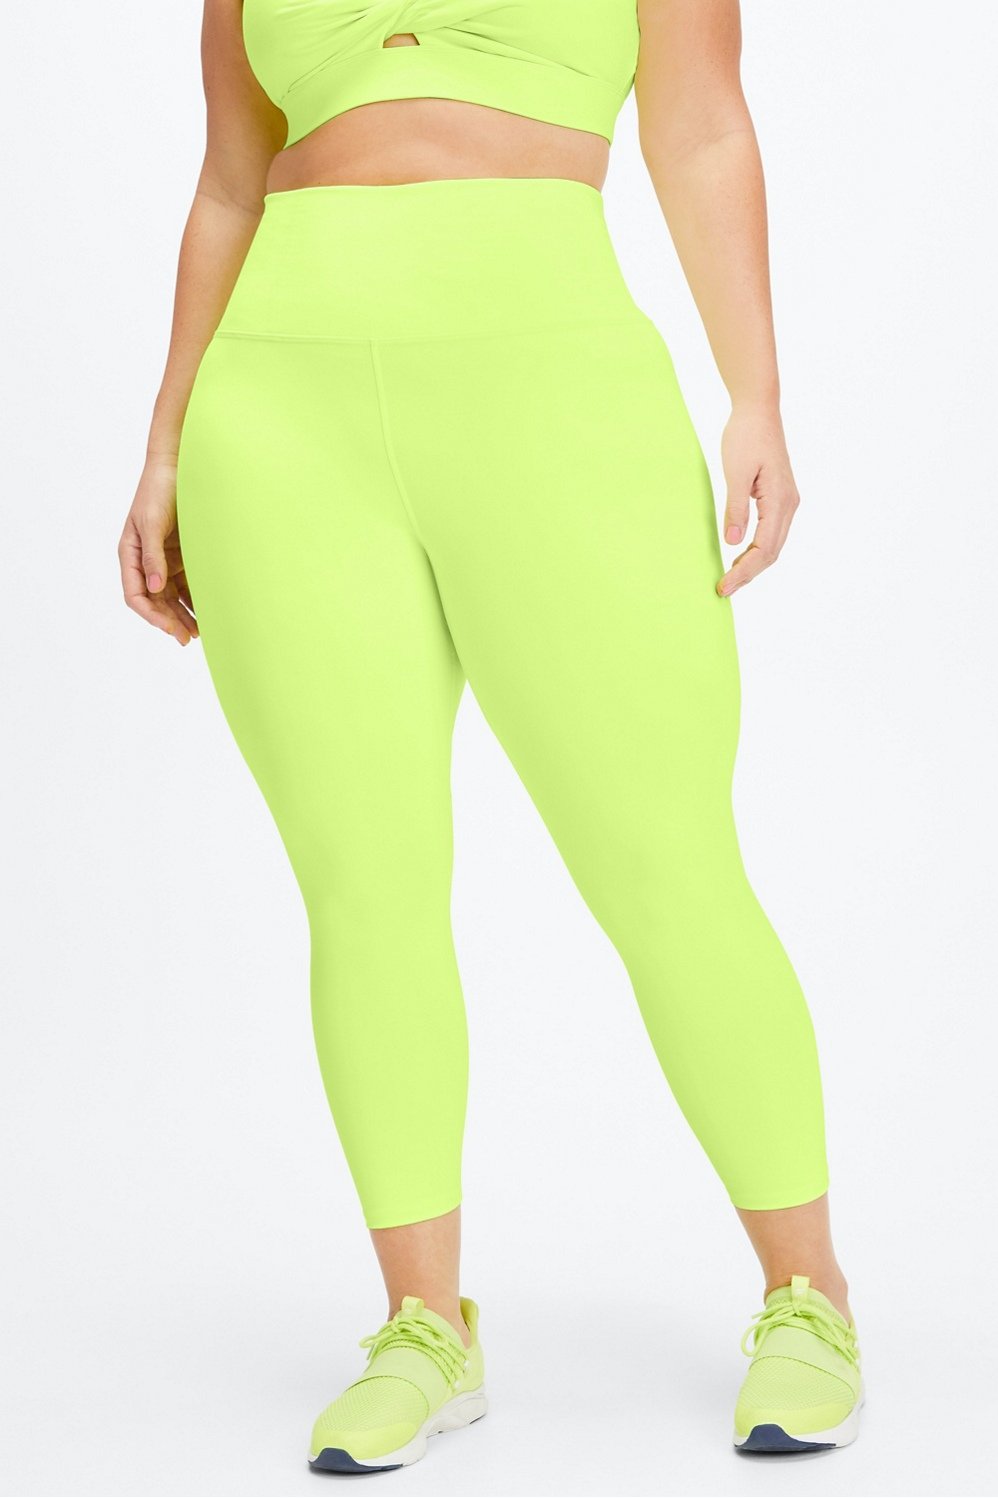 ▷ Fabletics Women's High-Waisted Iridescent Luxe Leggings Size 7